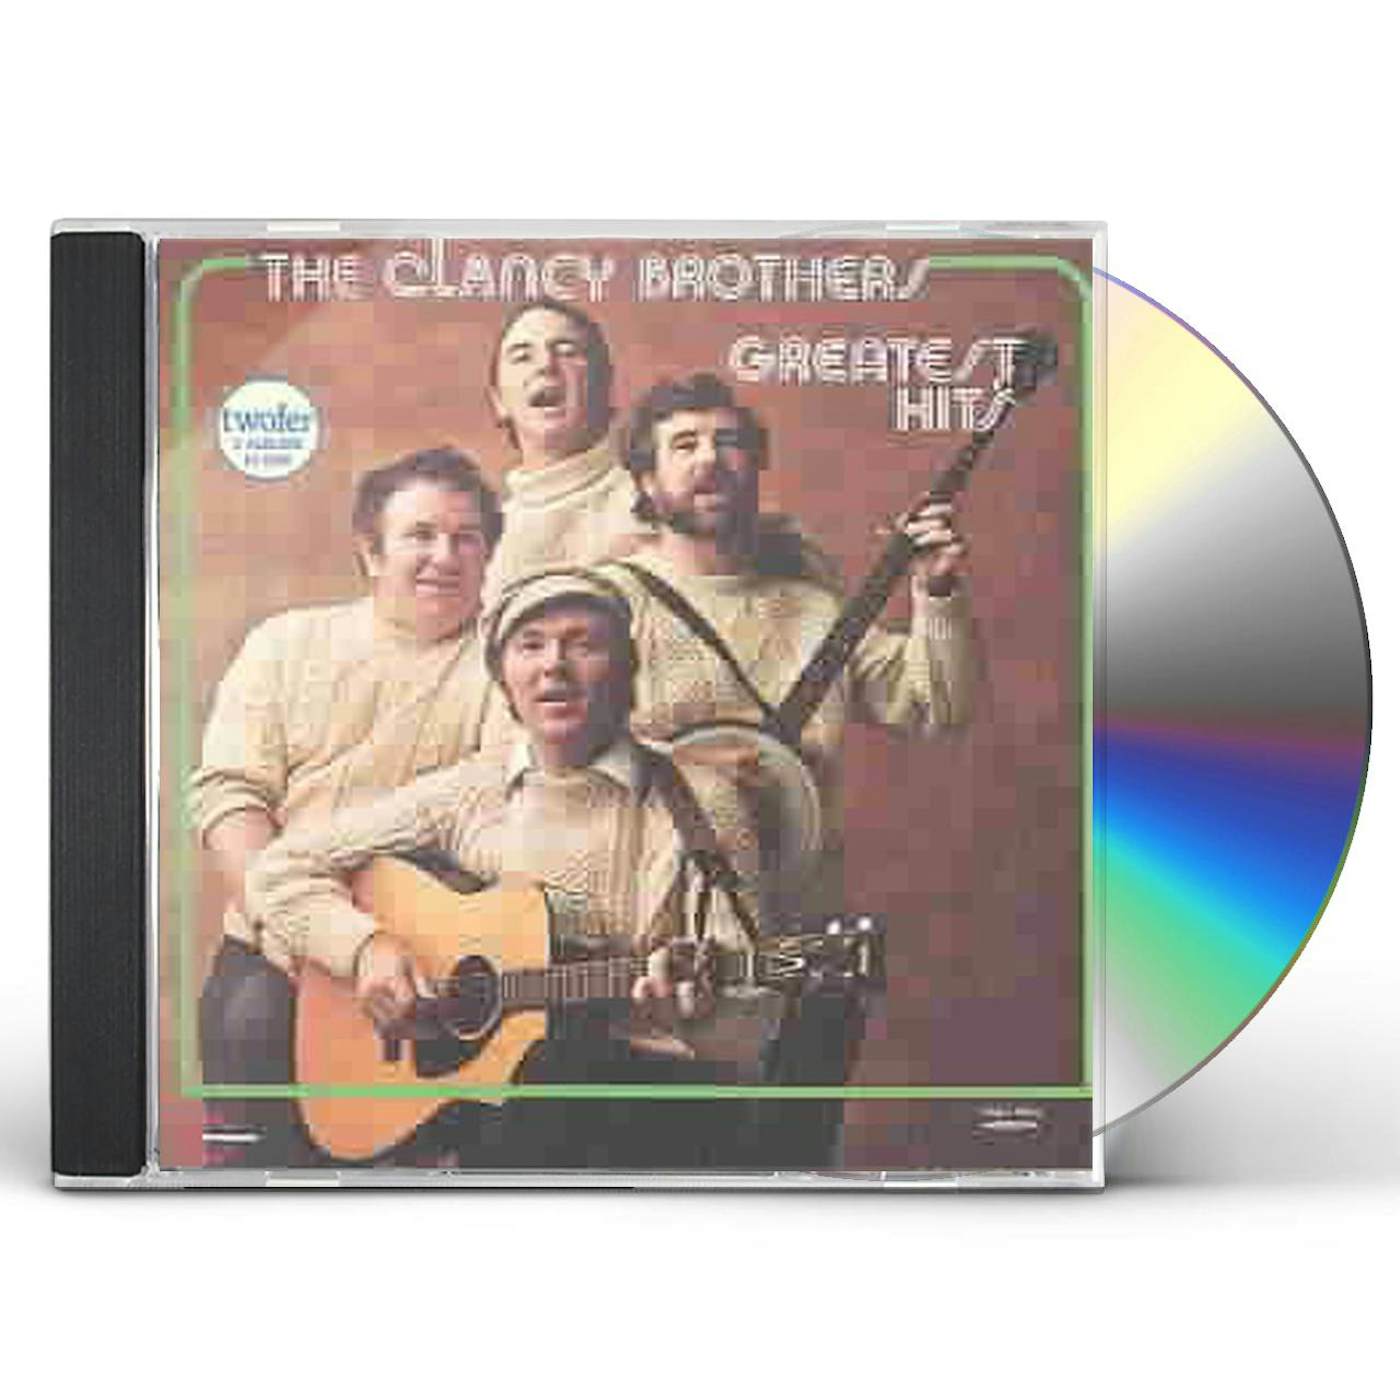 The Clancy Brothers GREATEST HITS CD